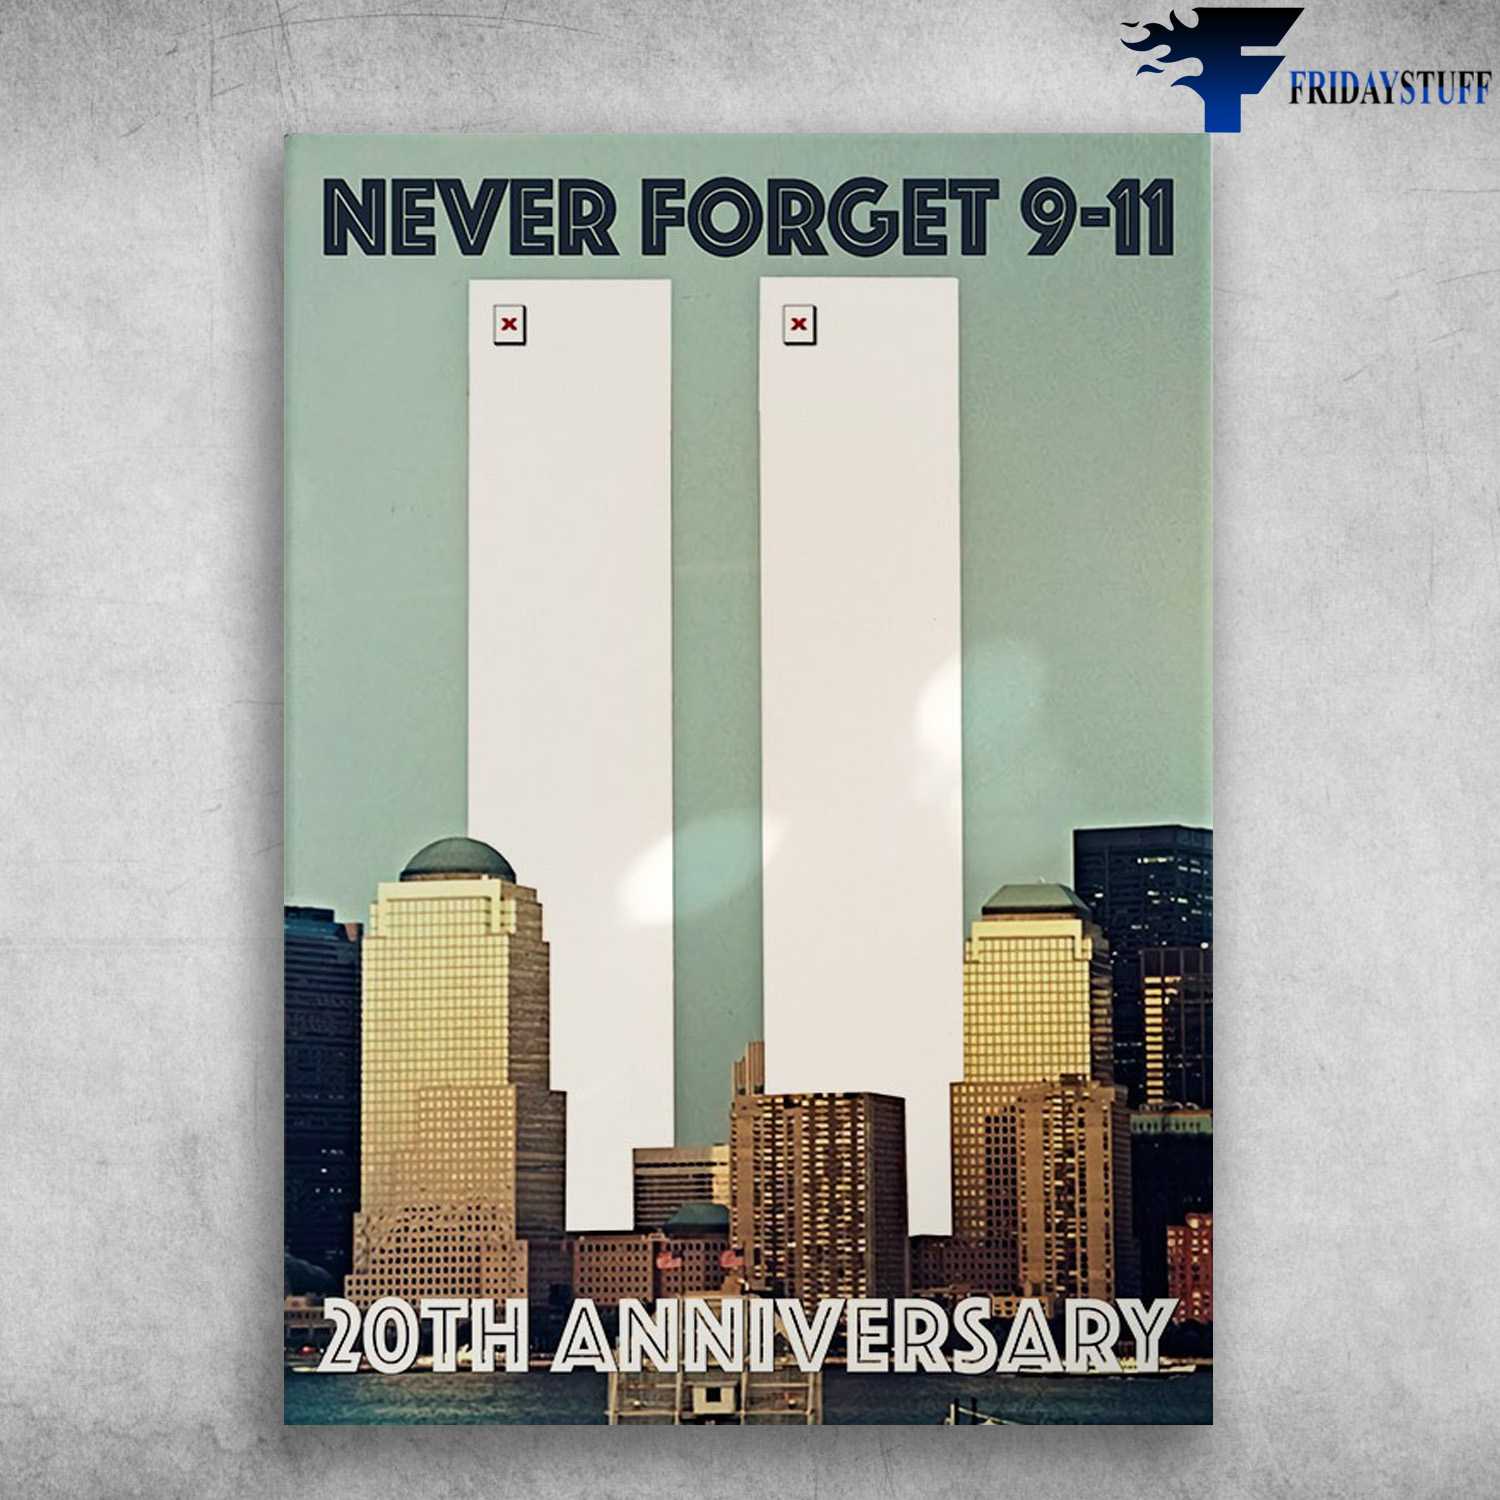 September 11 Attacks - Never Forget 9-11, 20th Anniversary